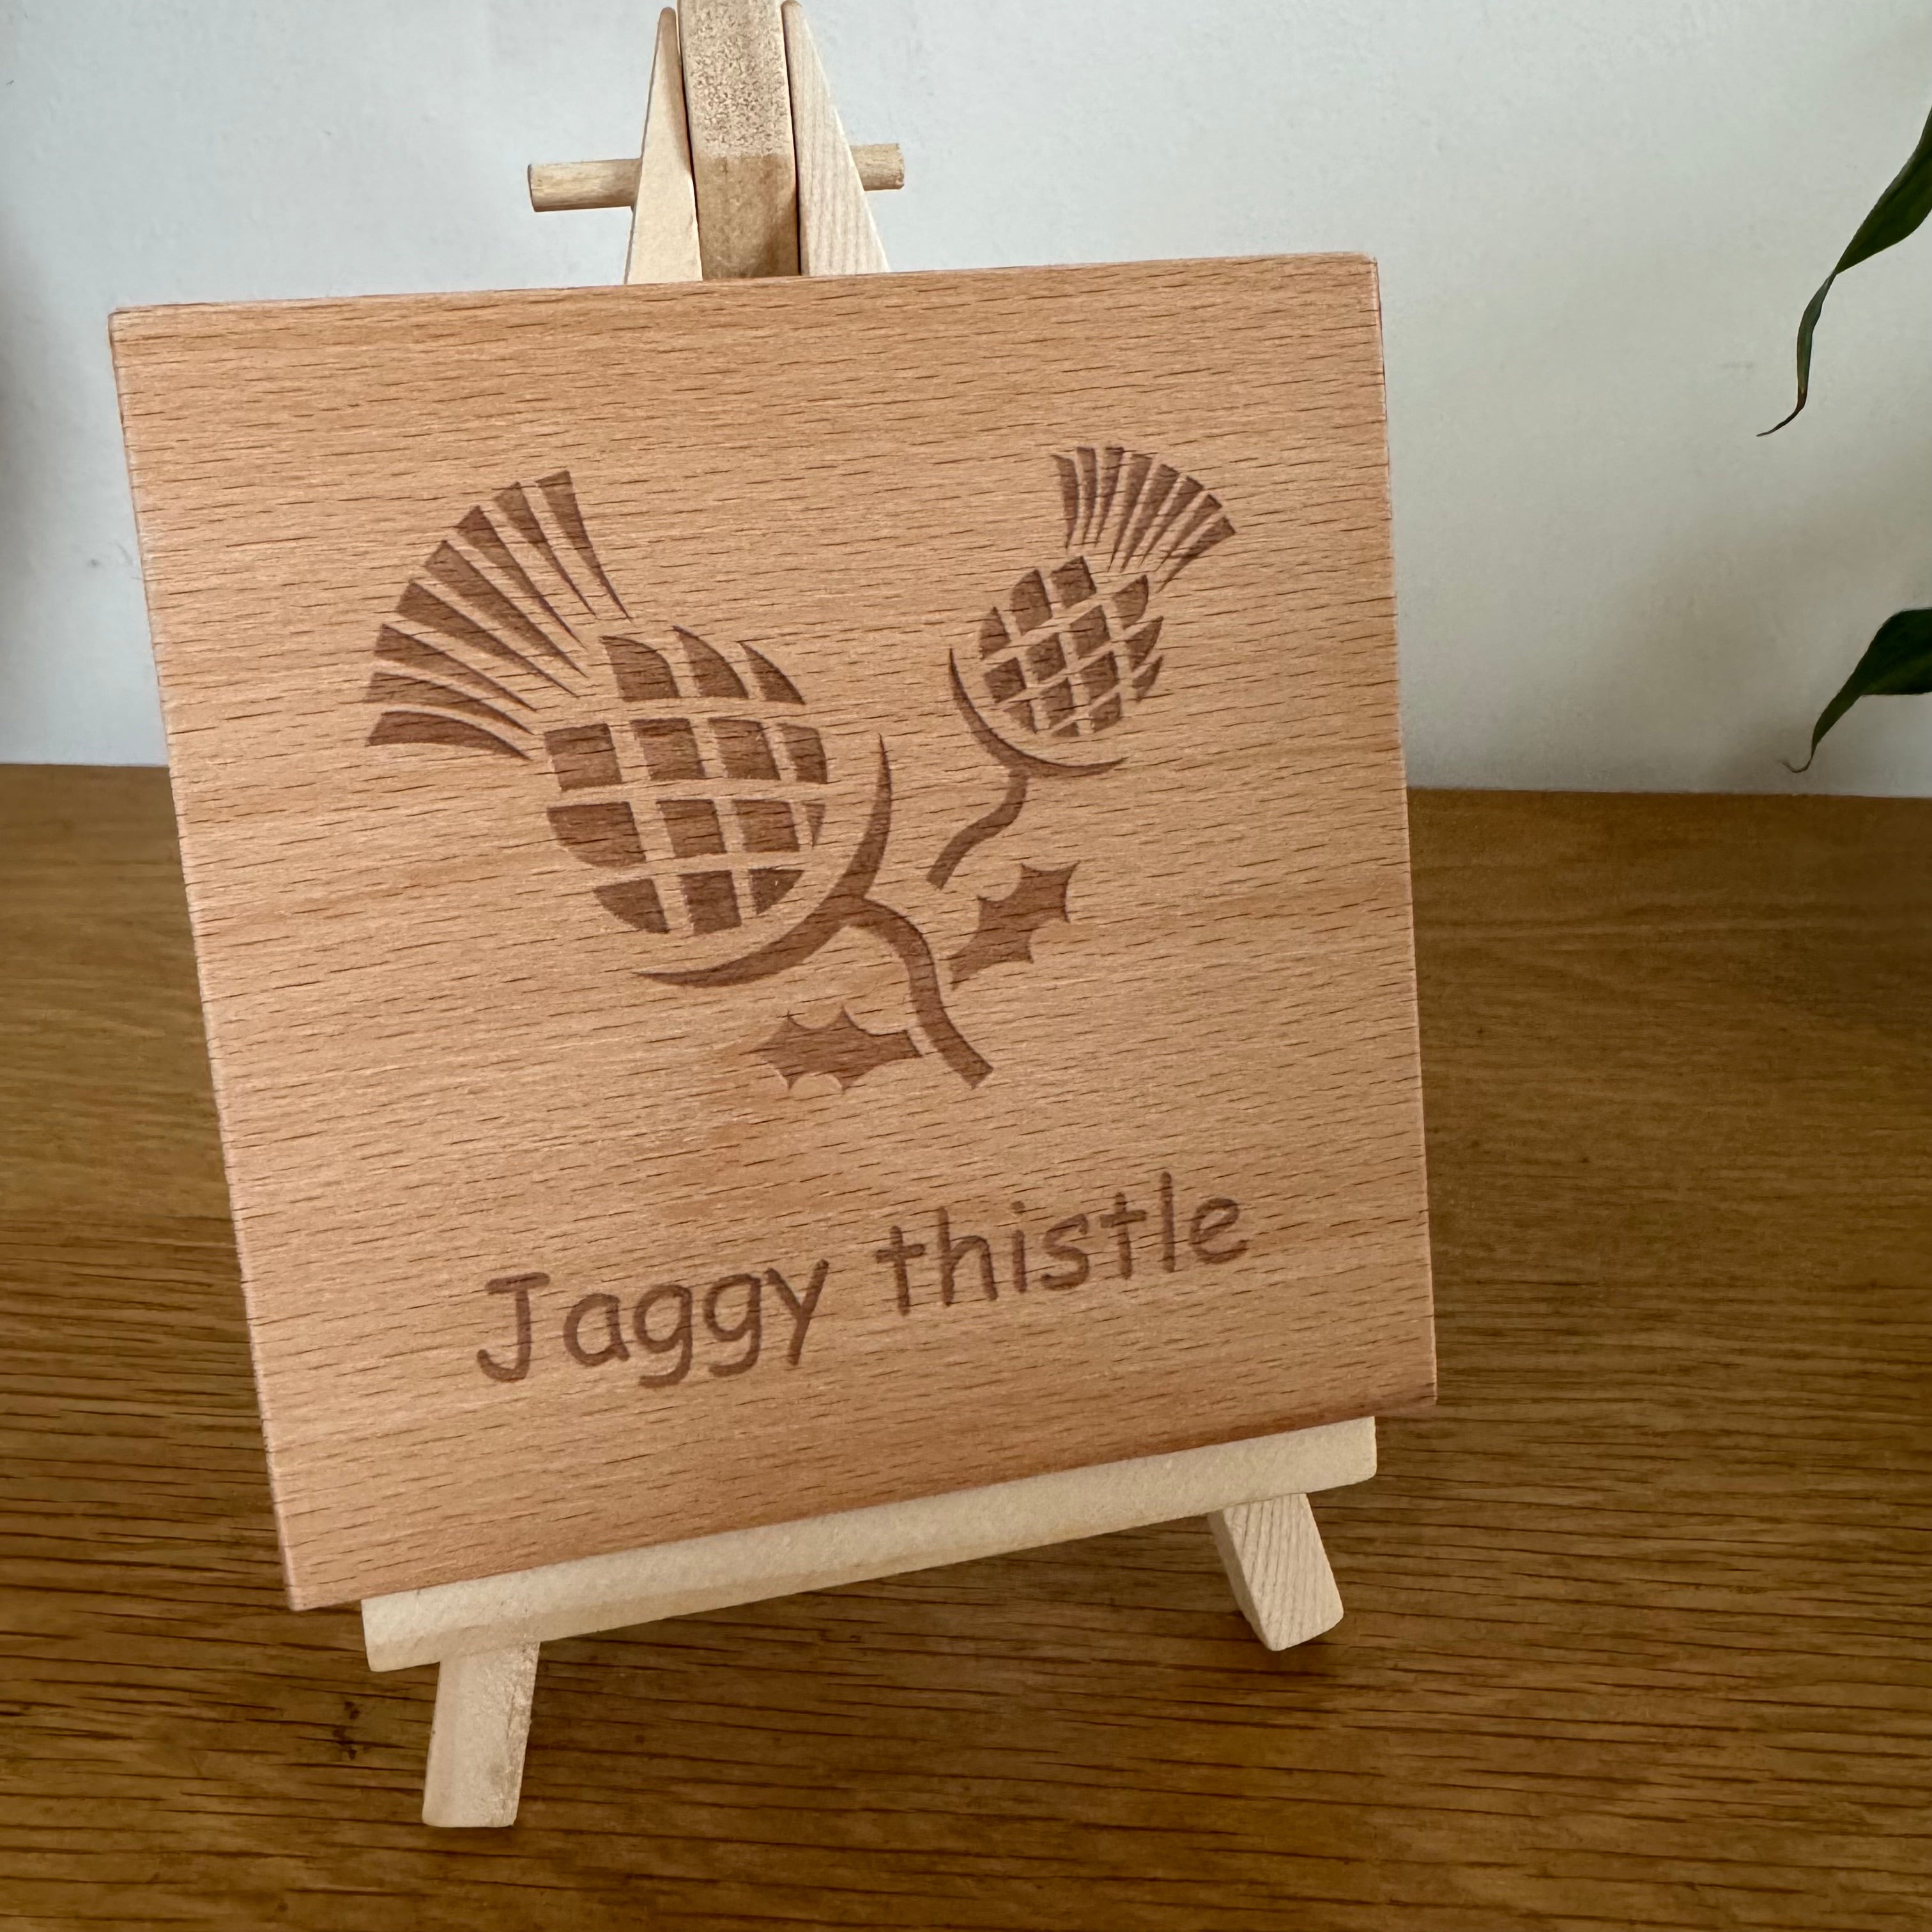 Wooden coaster gift - Scottish jaggy thistle - displayed on an easel